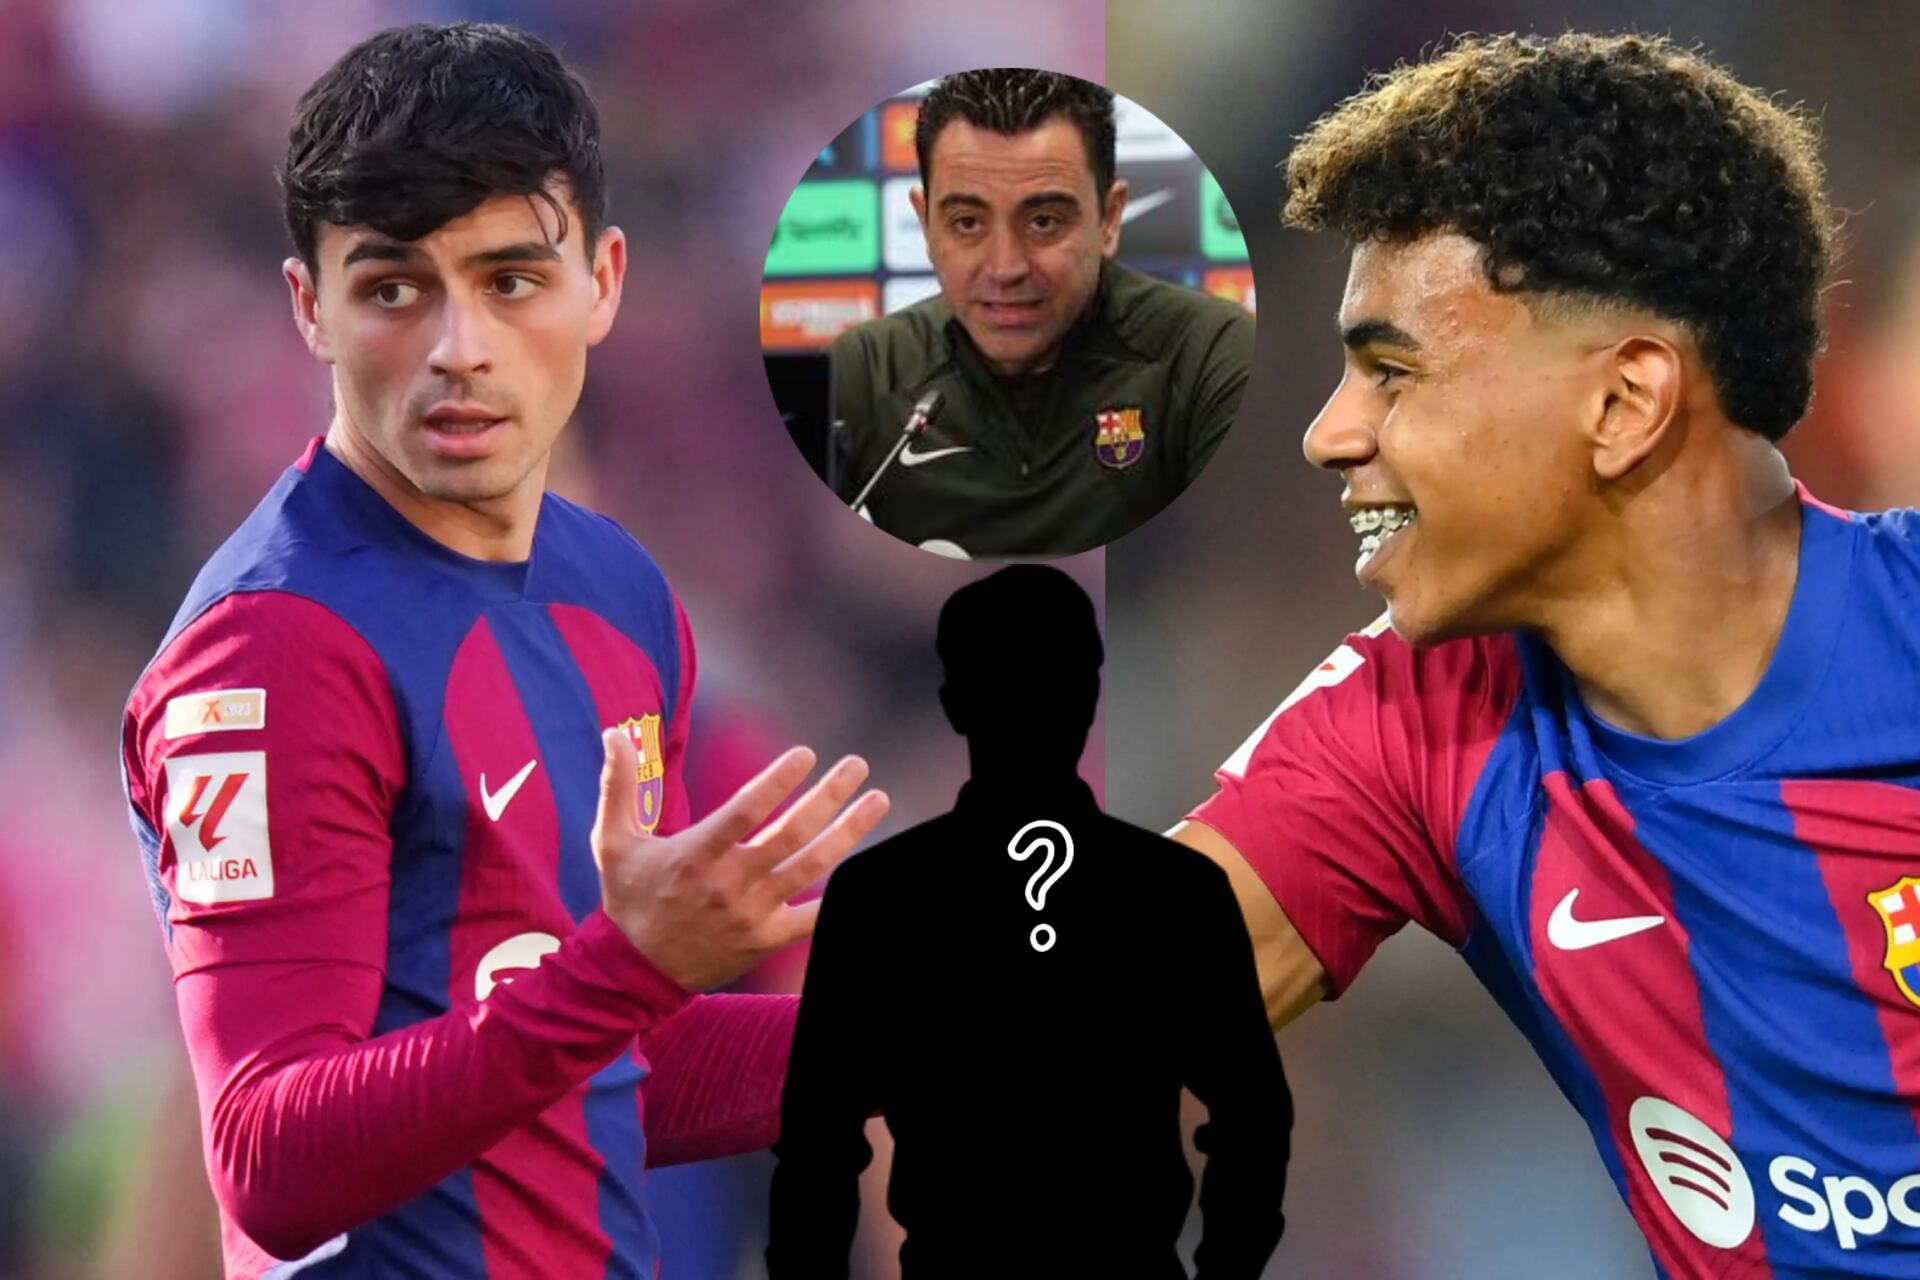 Neither Pedri nor Lamine Yamal, Barcelona's best young player according to Xavi